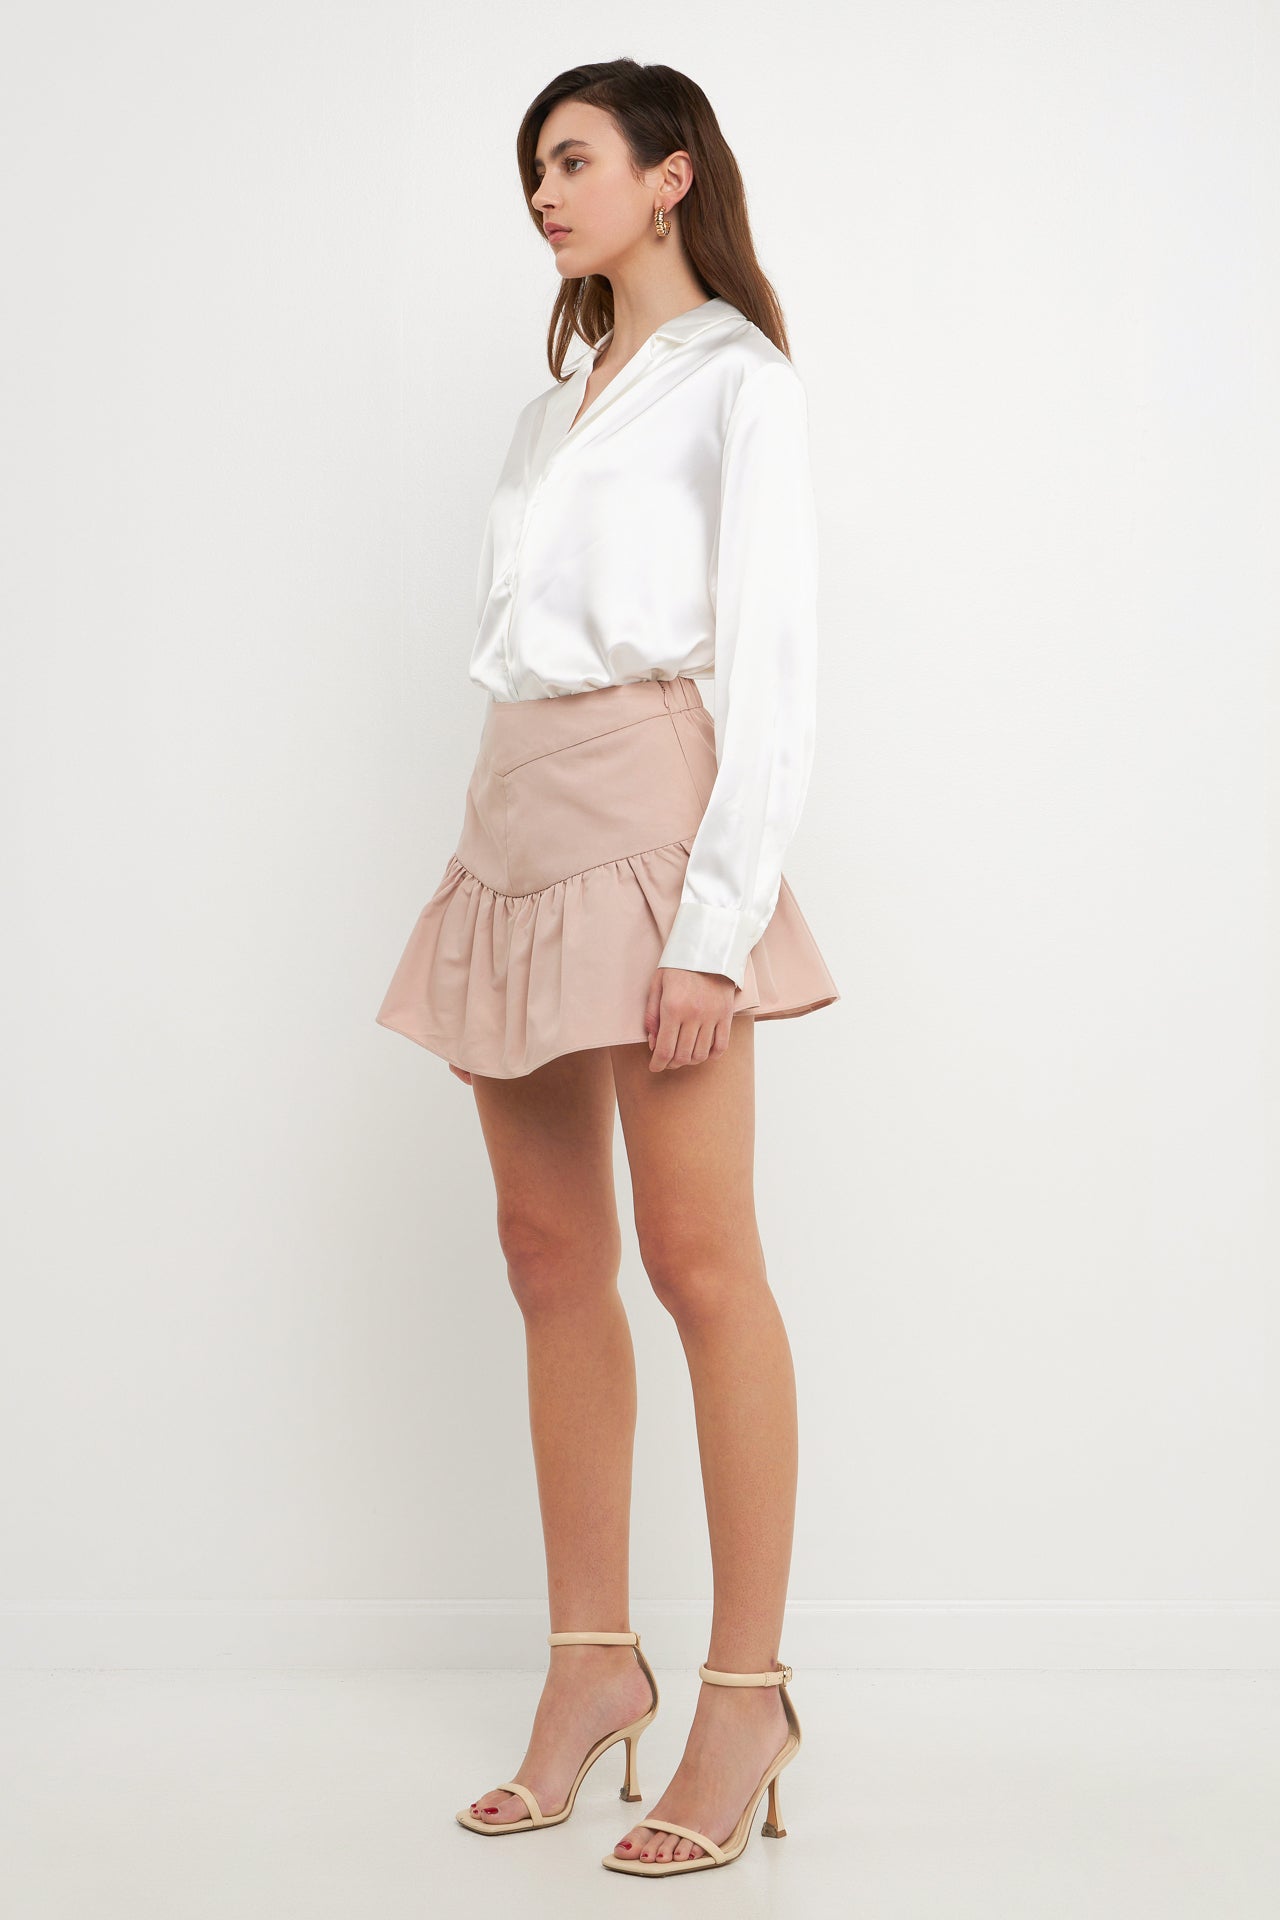 Endless Rose - Ruffled Skort - Skorts in Women's Clothing available at endlessrose.com